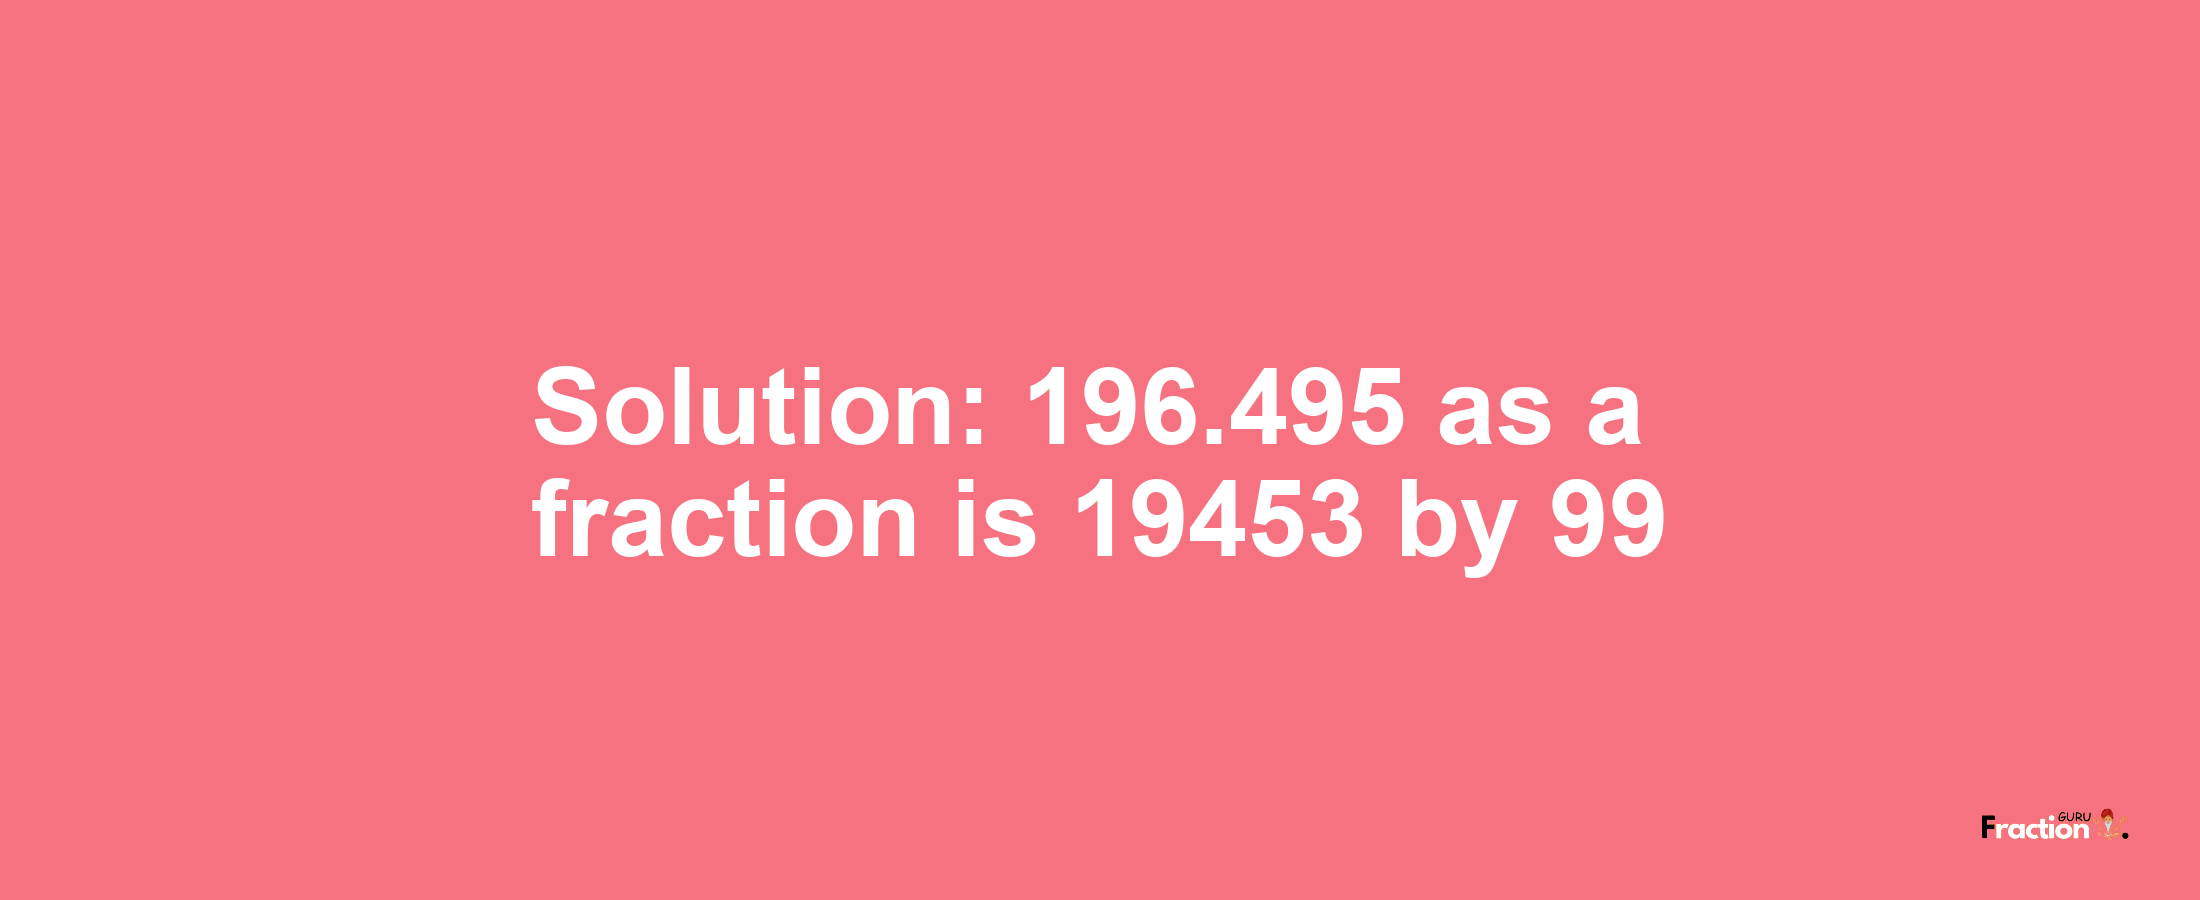 Solution:196.495 as a fraction is 19453/99